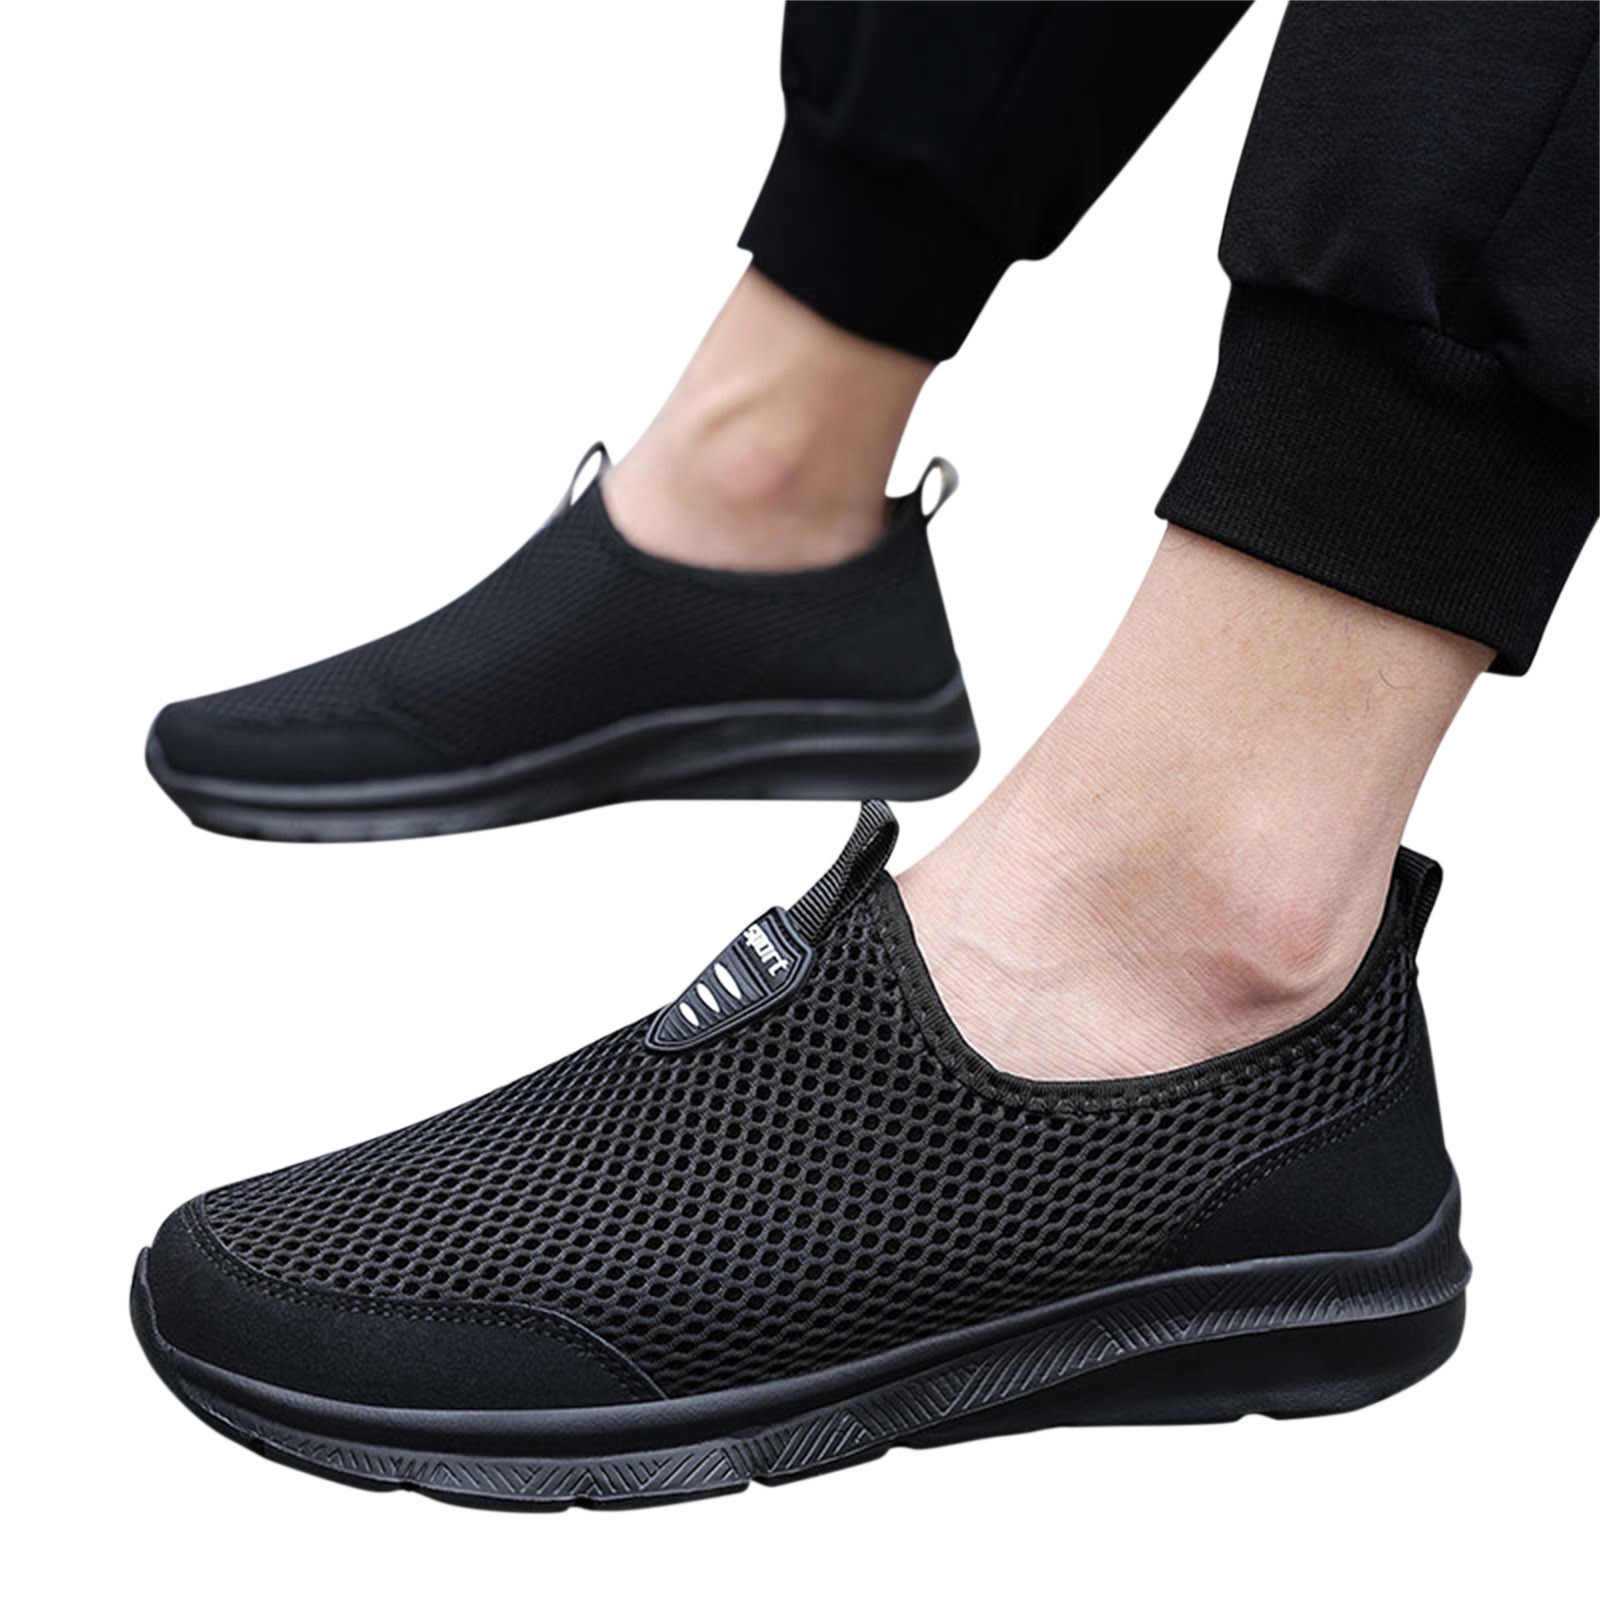 CBGELRT Shoes for Men Casual Men's Sneakers Tennis Shoes Men Fashion Summer Men Sneakers Breathable Mesh Shallow Lace up Casual Shoes Male Black 48 - image 4 of 9